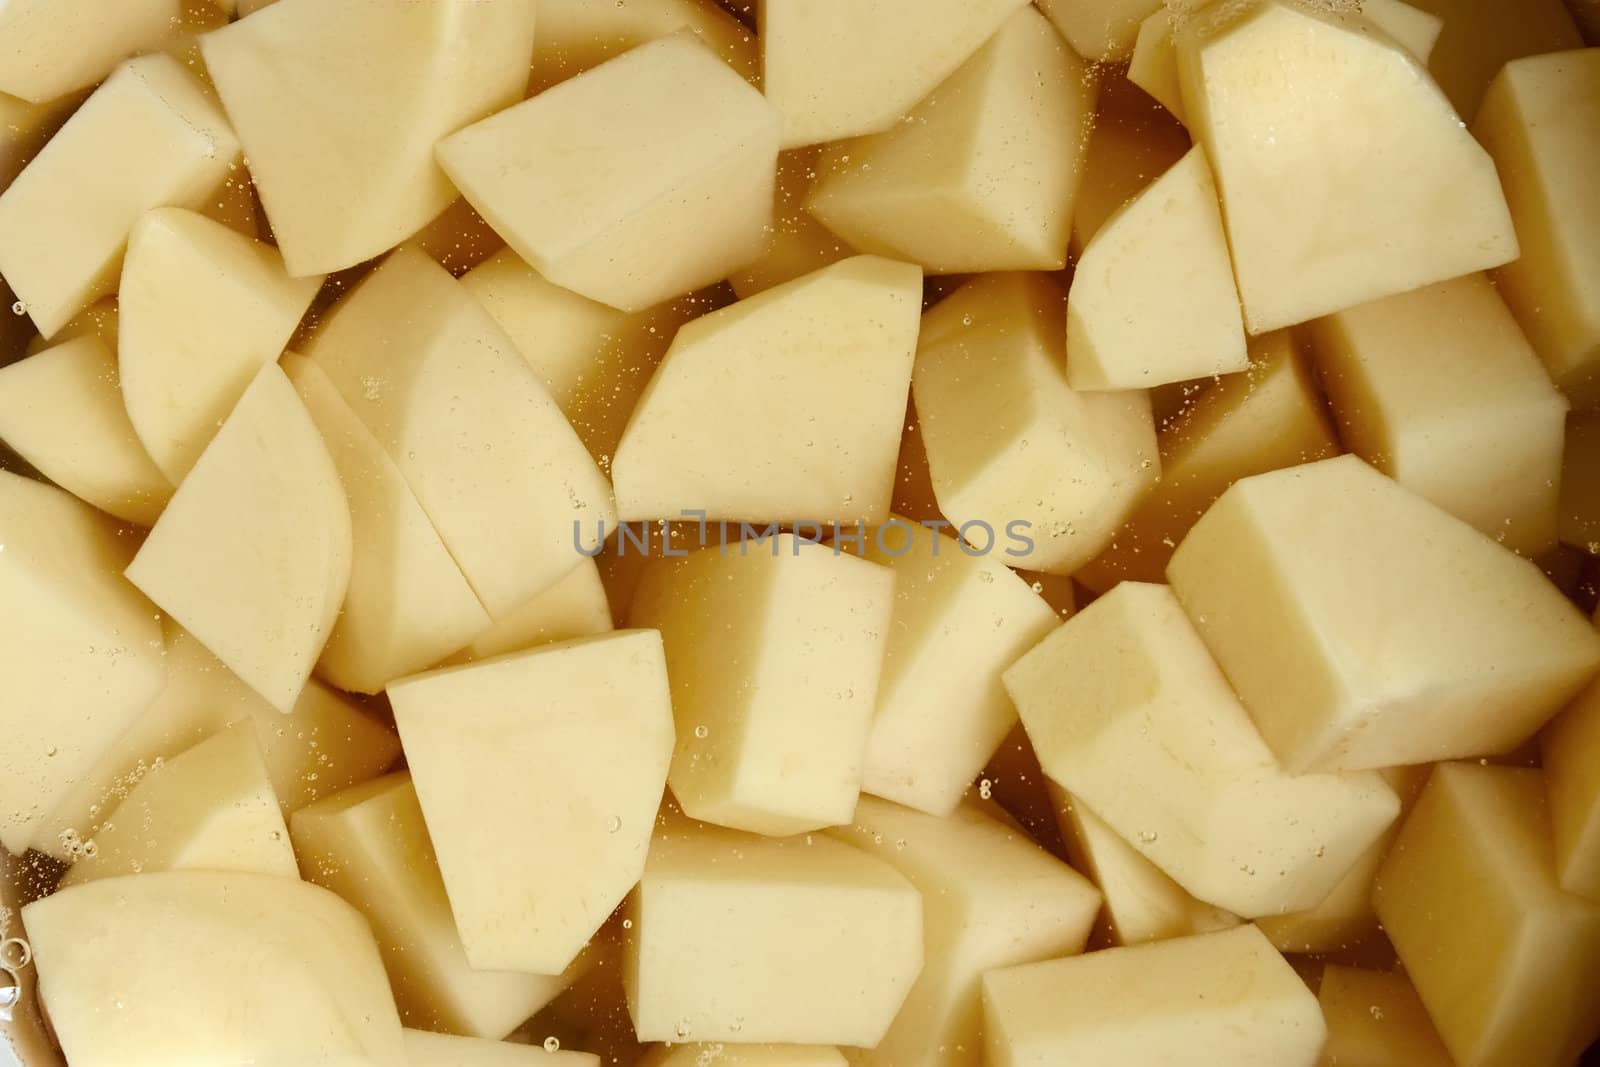 Cut into cubes potato tubers in water before cooking